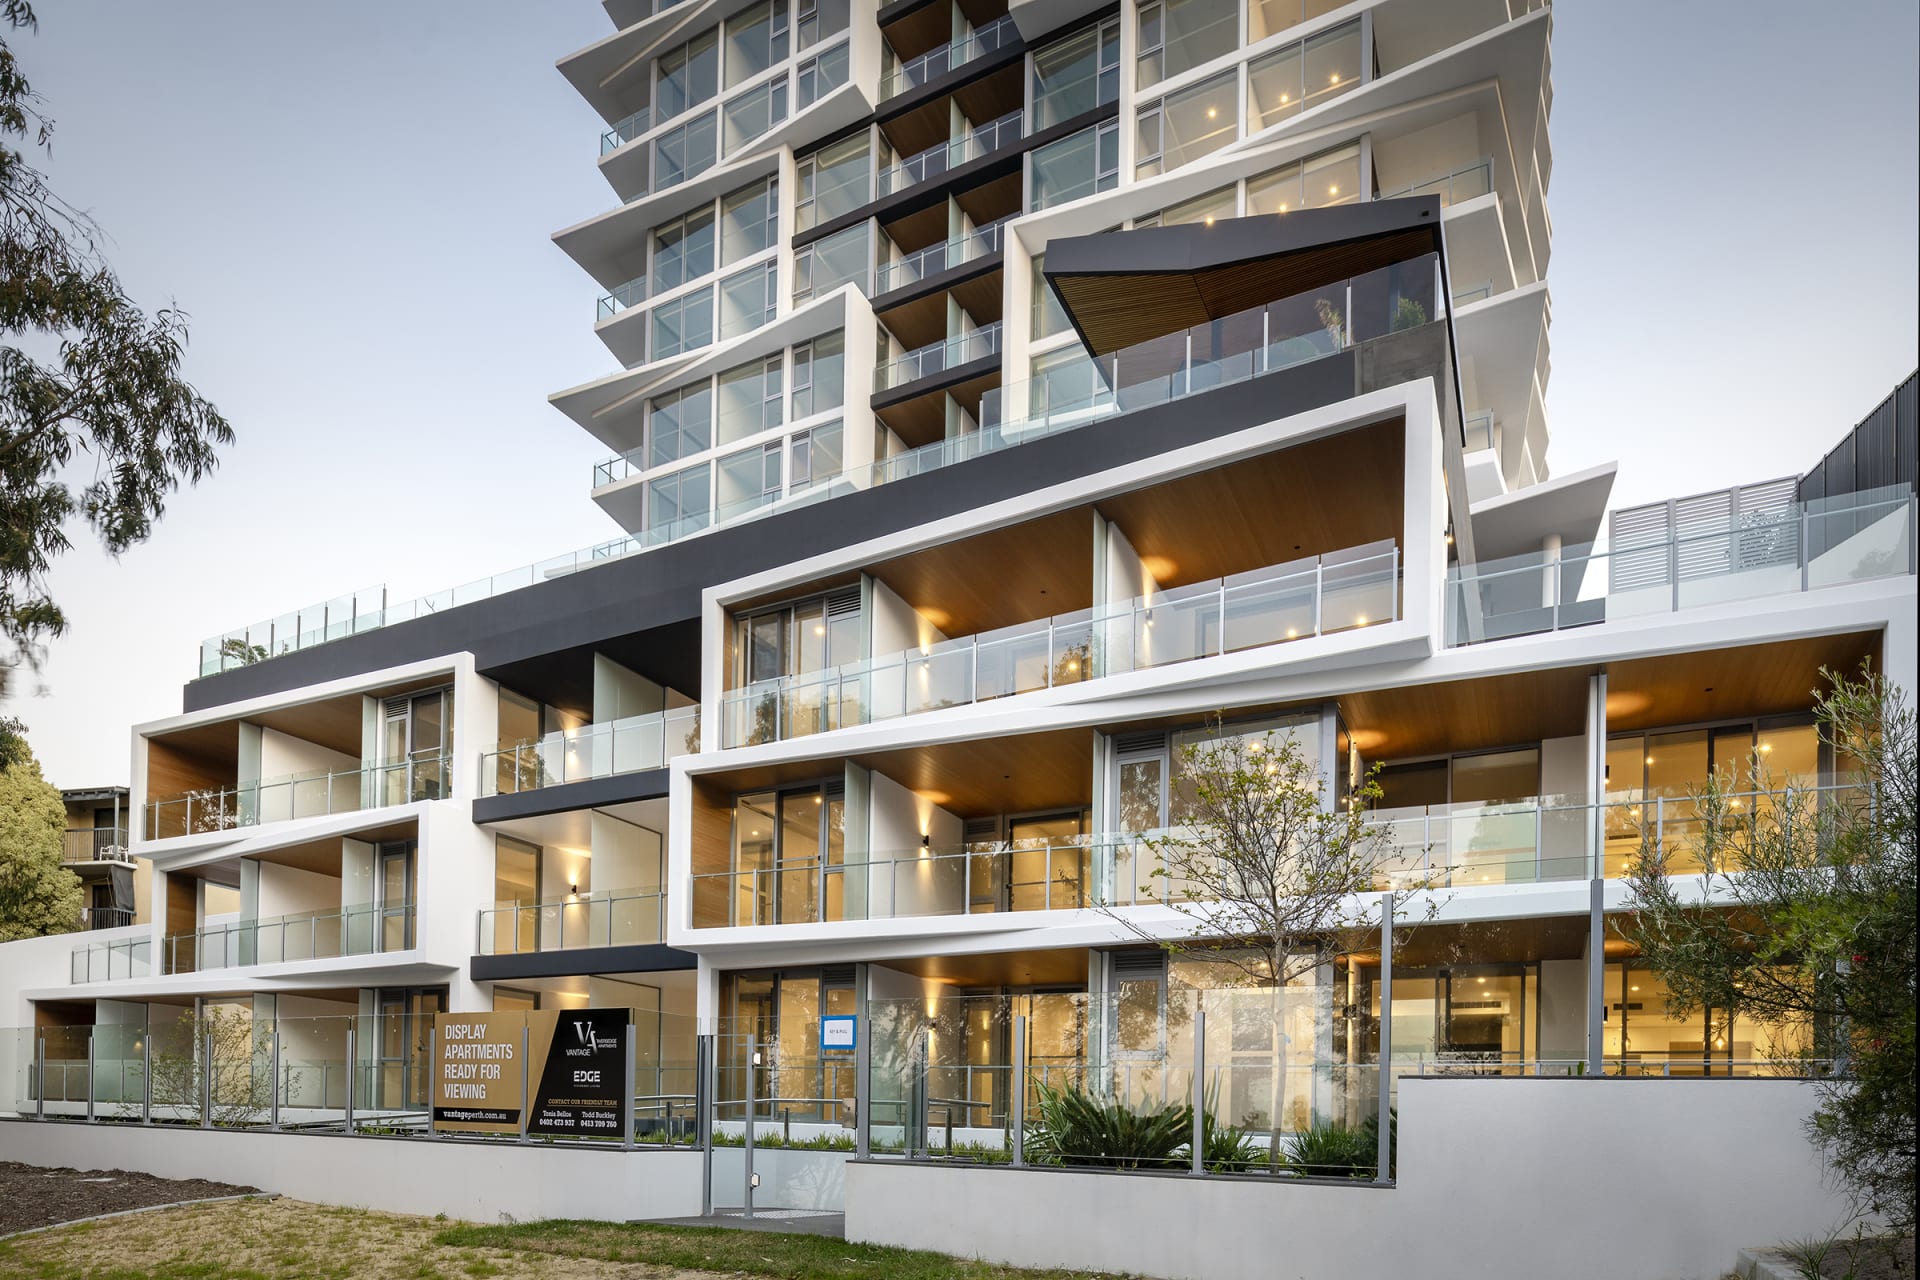 Move-in ready apartments on the Swan River: Inside Edge Visionary Living's Vantage